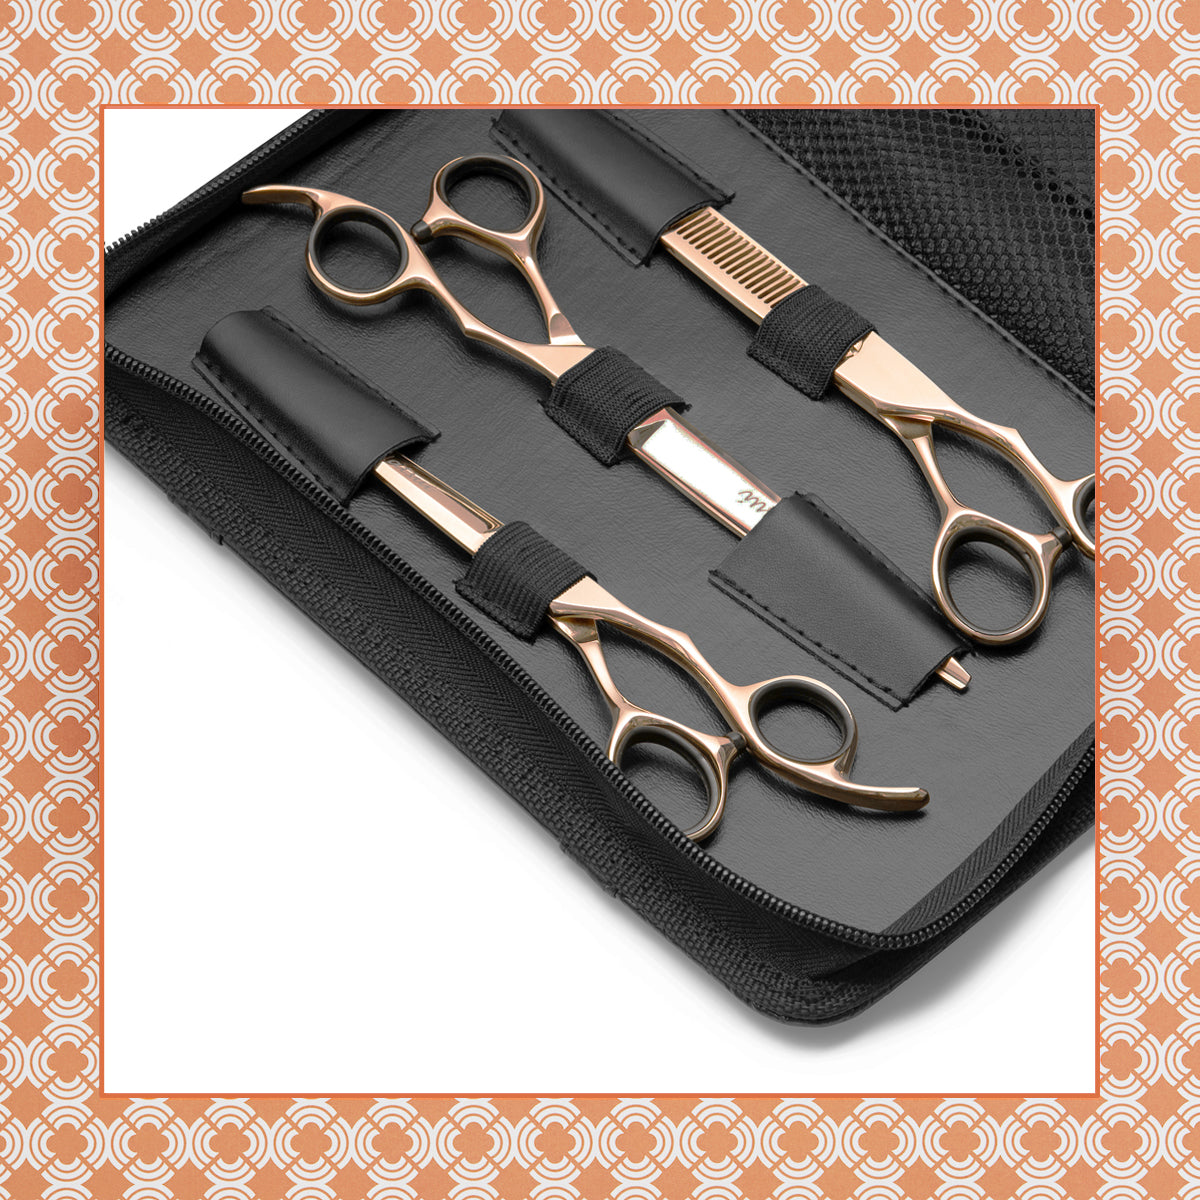 Matsui Aichei Mountain Rose Gold Limited Edition, Hairdressing Scissors, Triple Set (6772624162882)